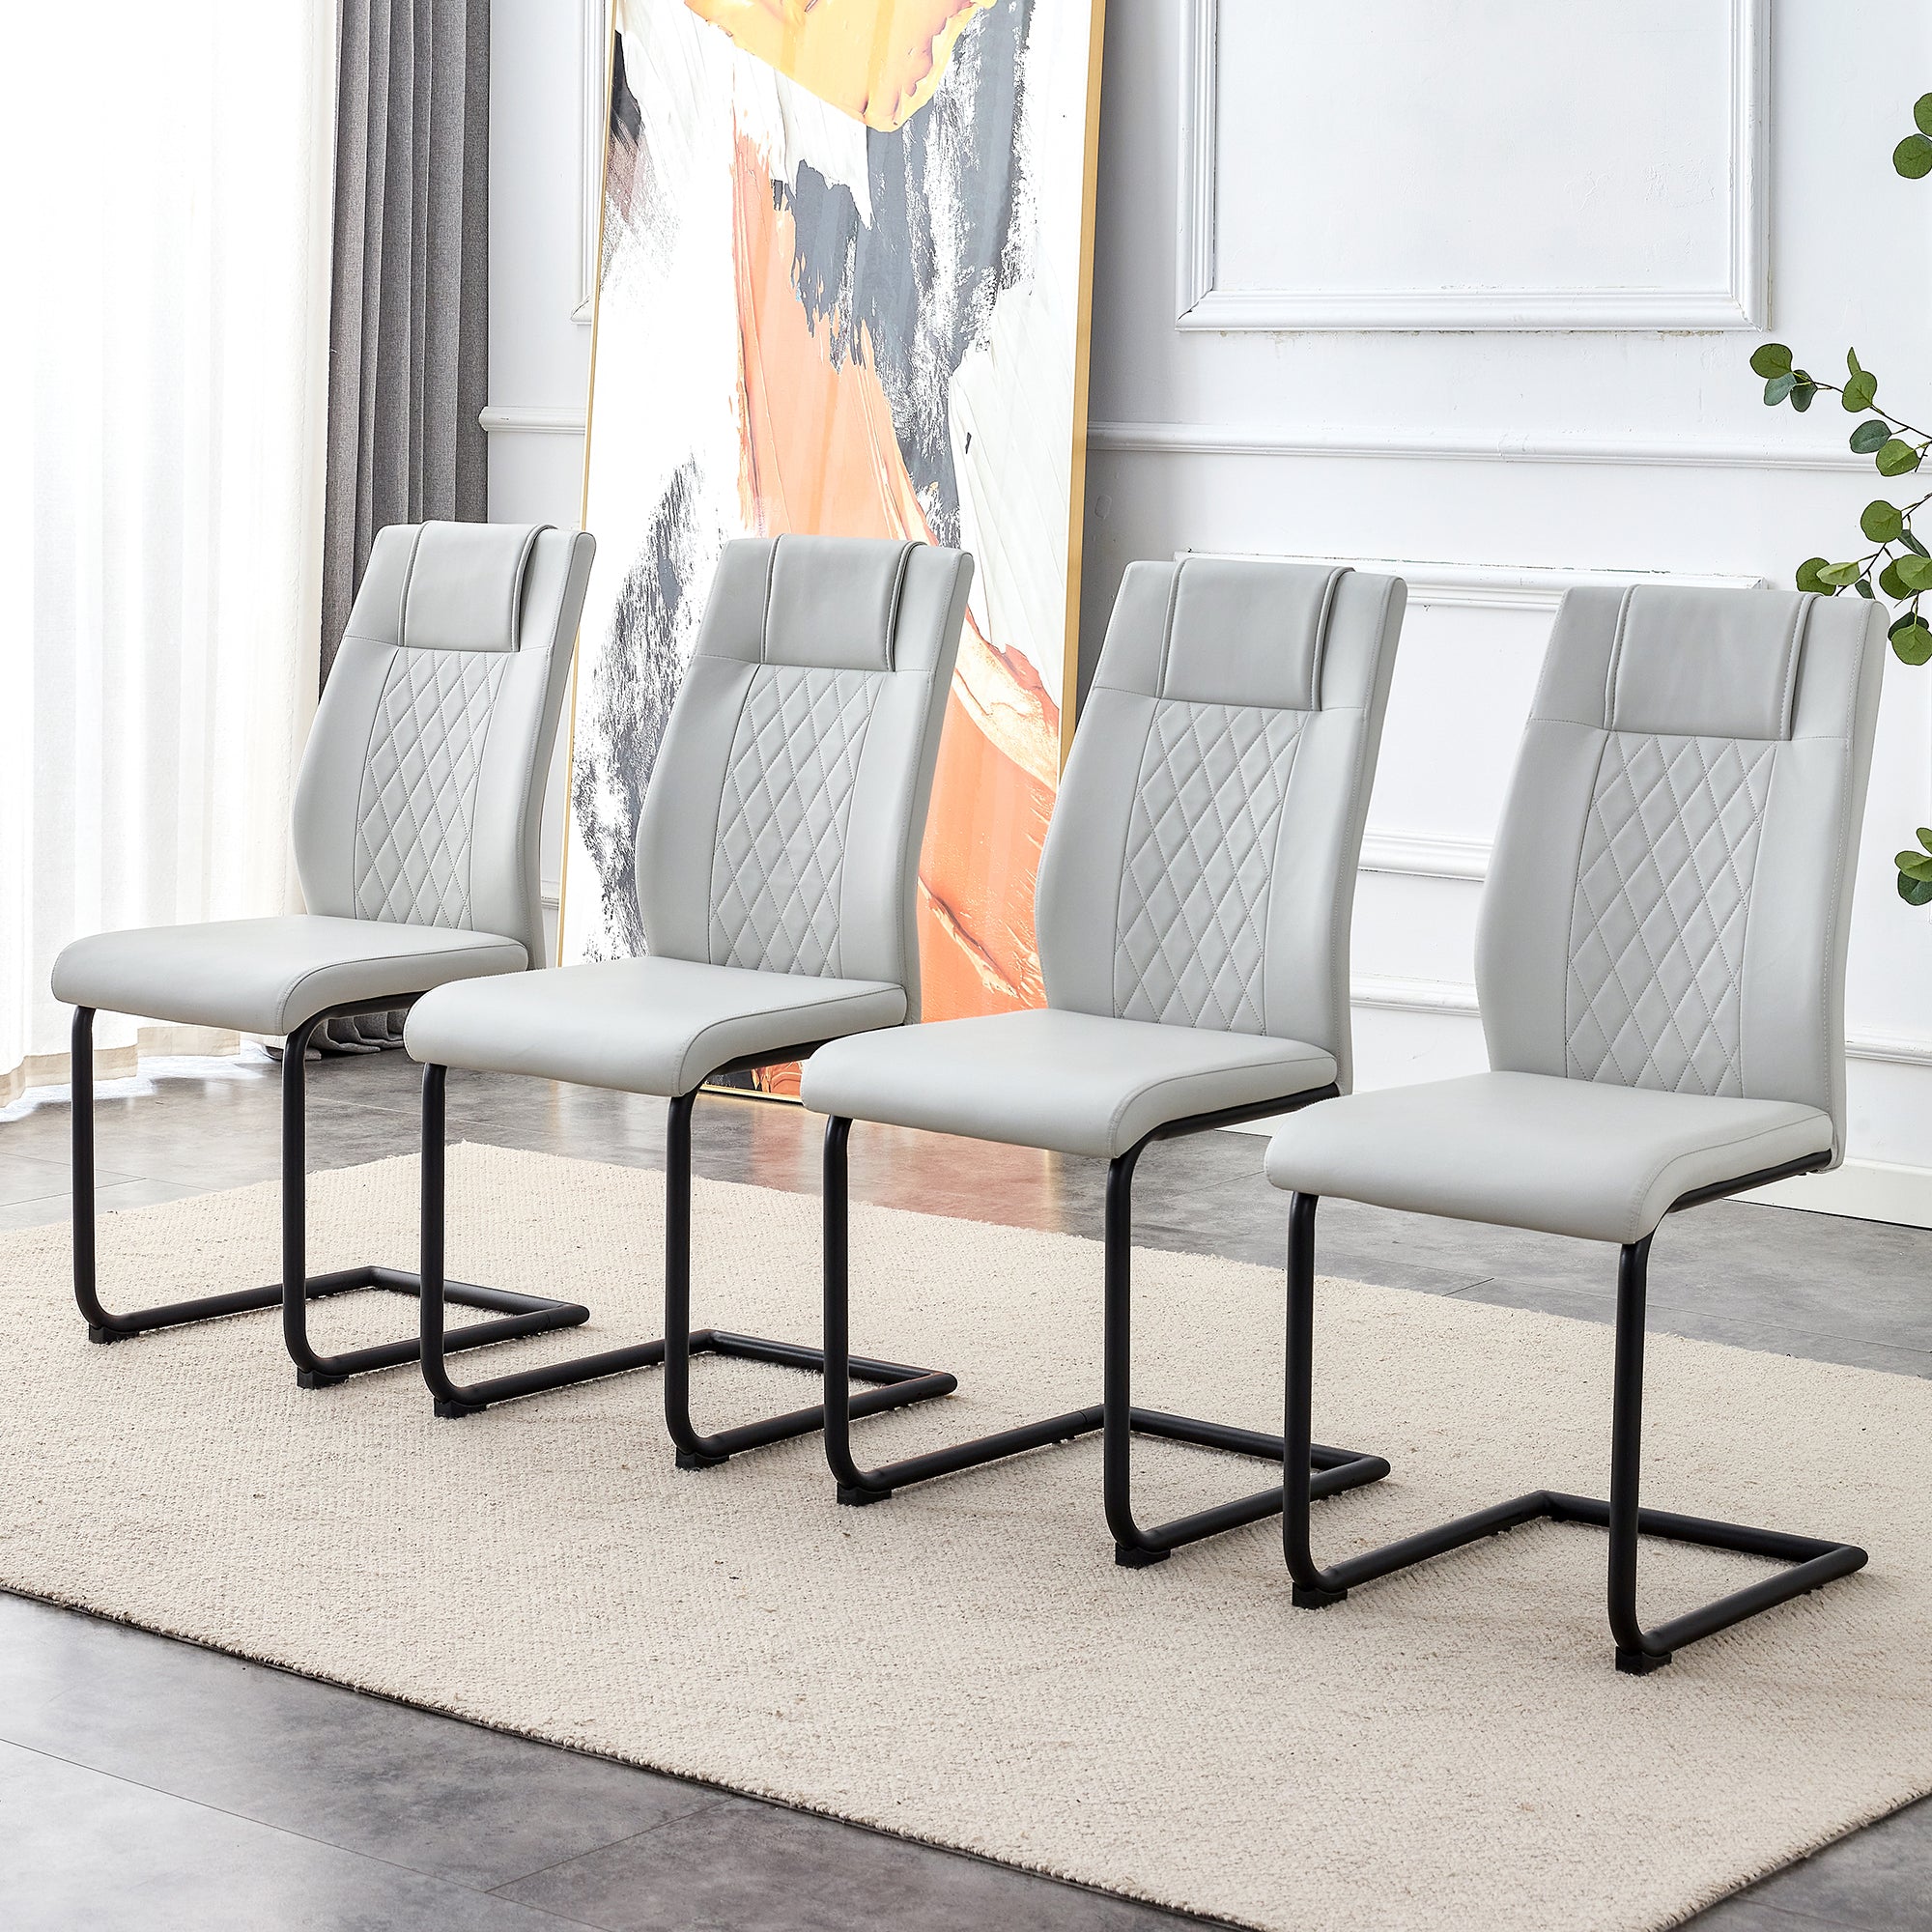 Set of 4 Modern Light Gray Faux Leather Dining Chairs with Black Metal Legs